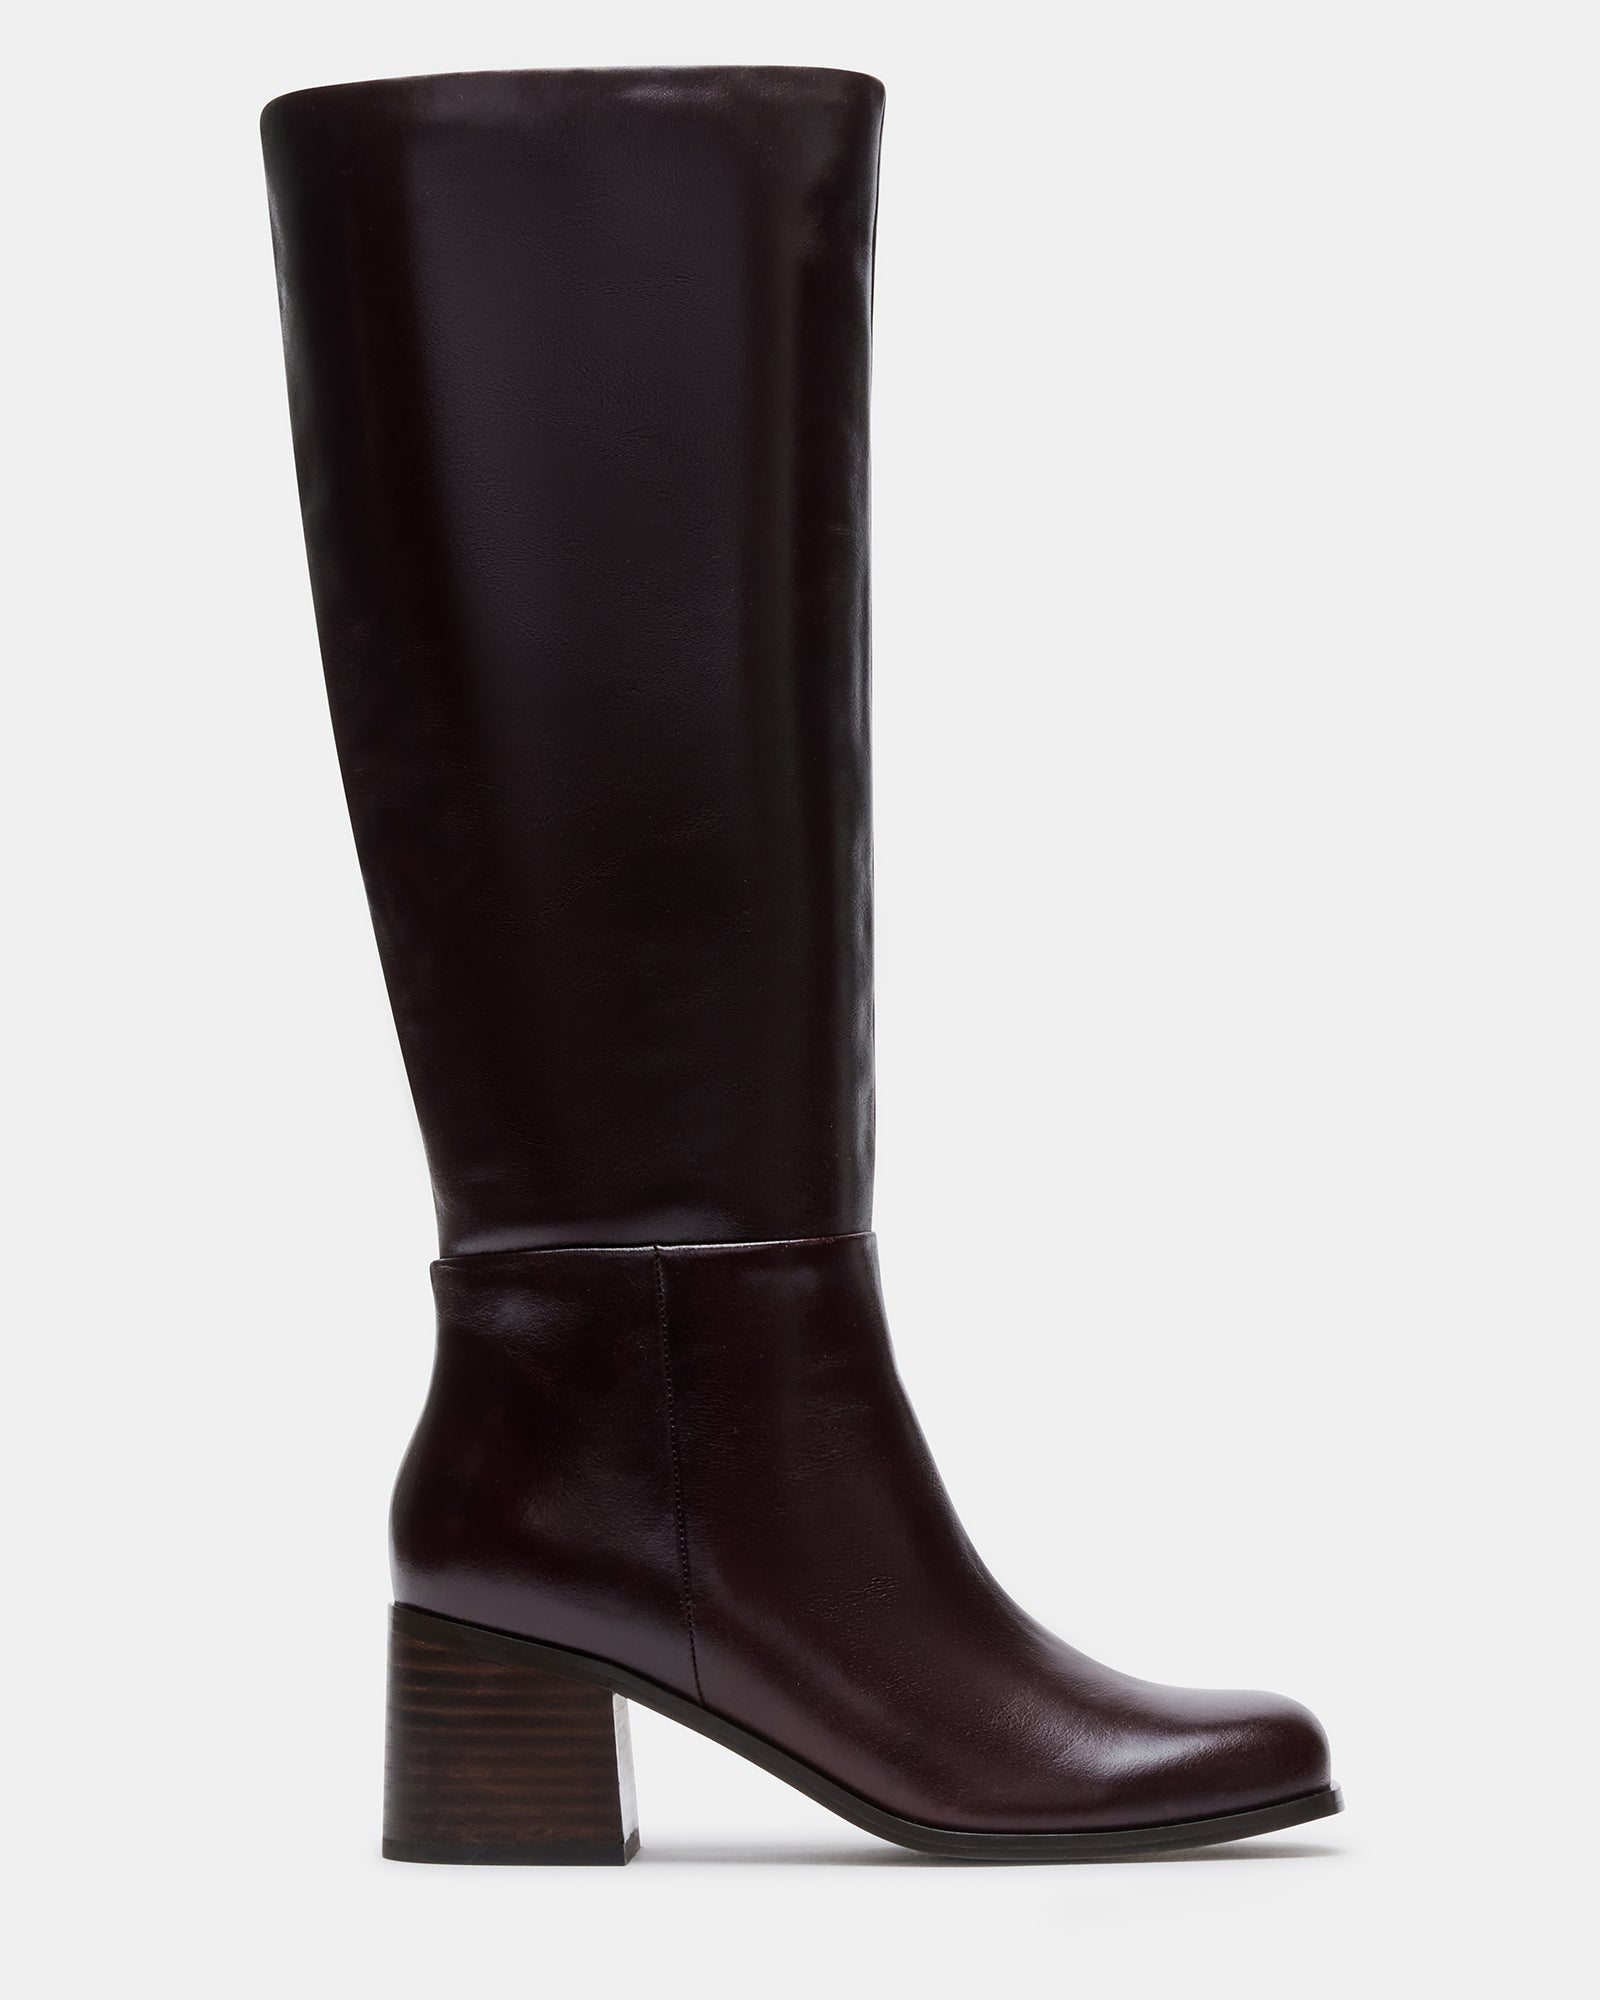 ELKAH Brown Leather Knee High Square Toe Boot | Women's Boots – Steve ...